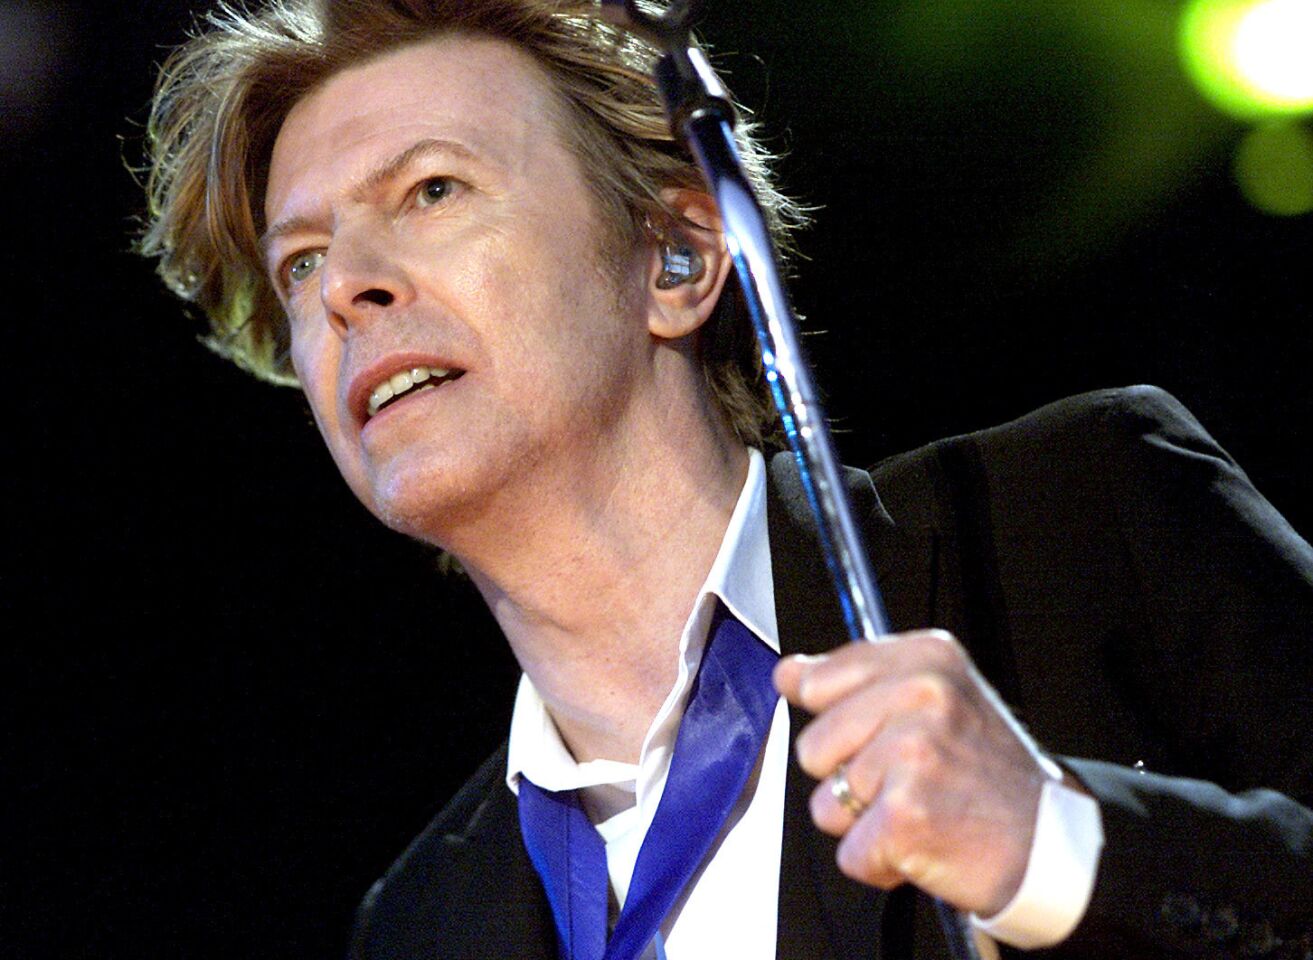 David Bowie, performing at the Area2 Festival in Irvine in 2002, earned four posthumous nominations for the 59th Grammy Awards.